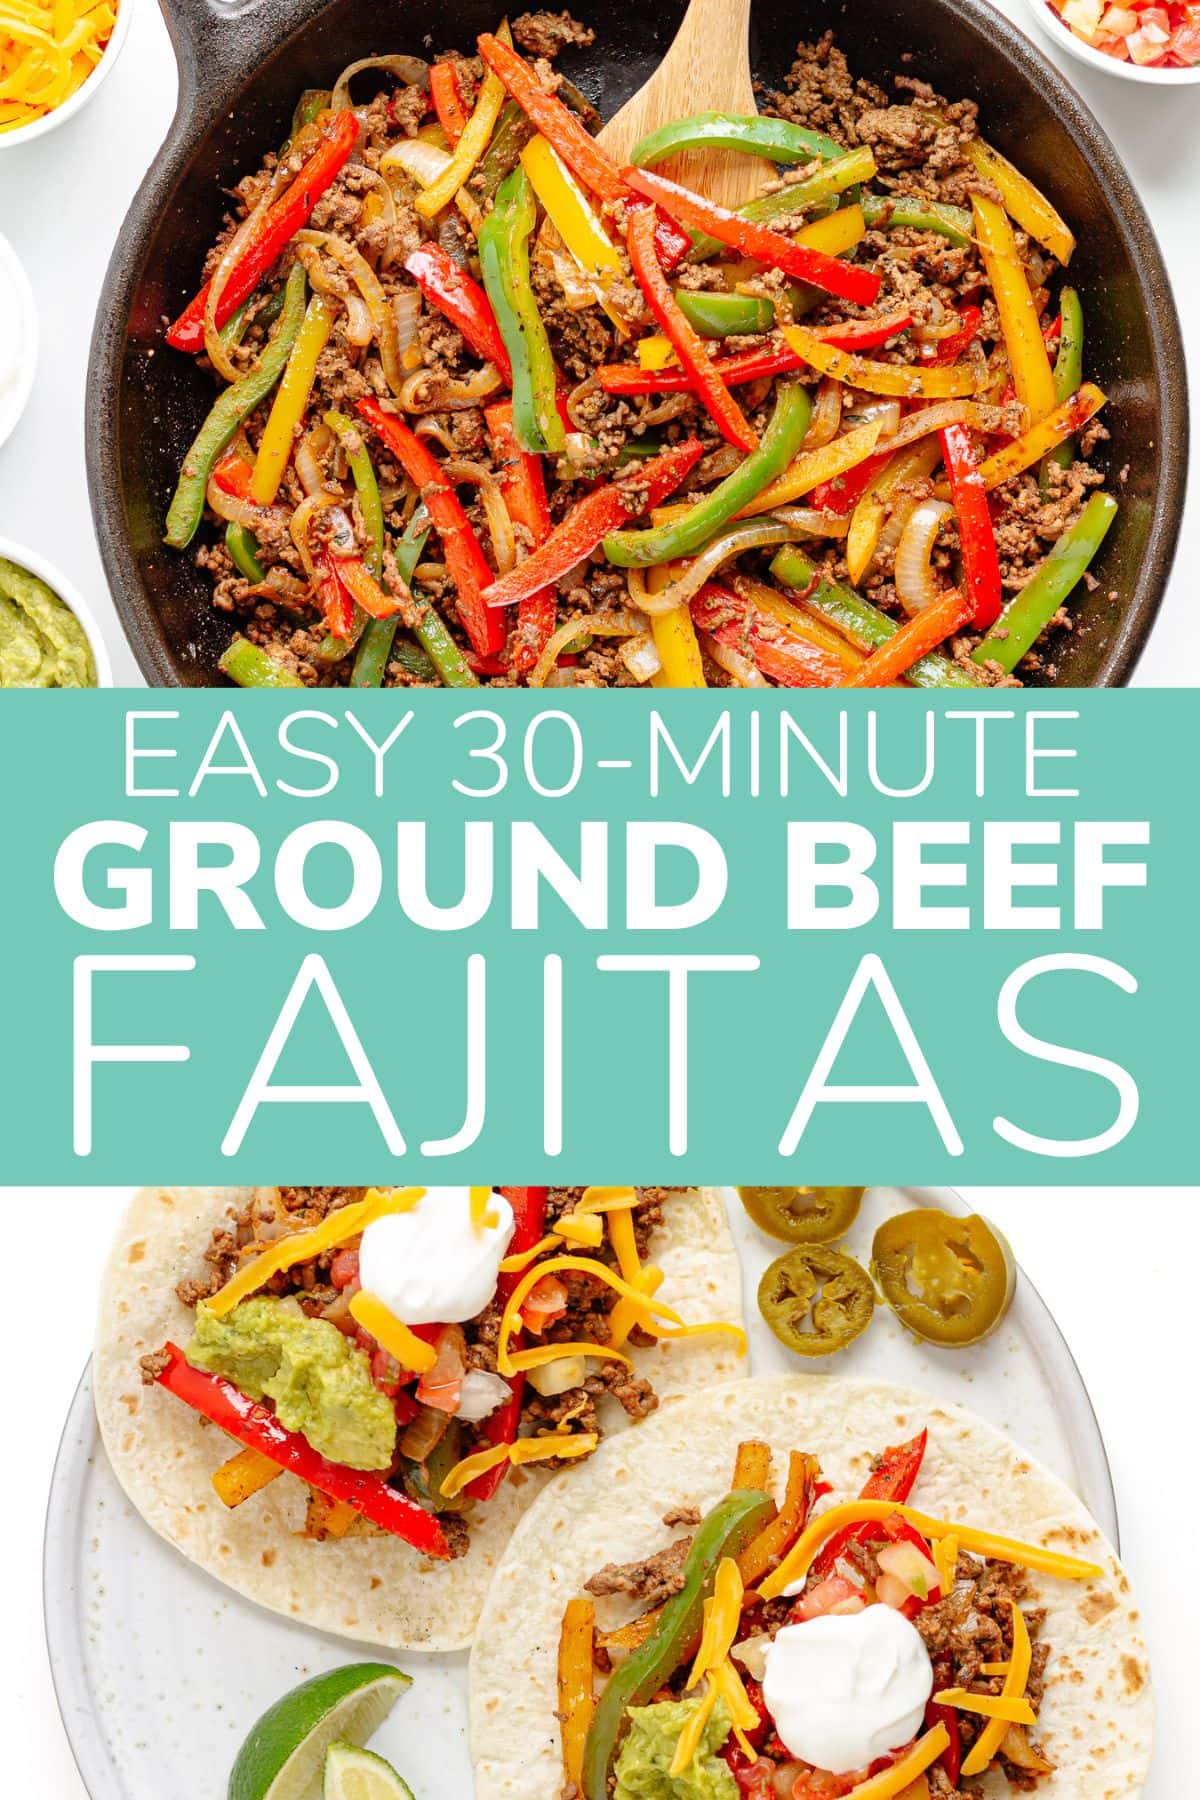 Collage graphic with two fajitas photos and text overlay that reads "Easy 30-Minute Ground Beef Fajitas".